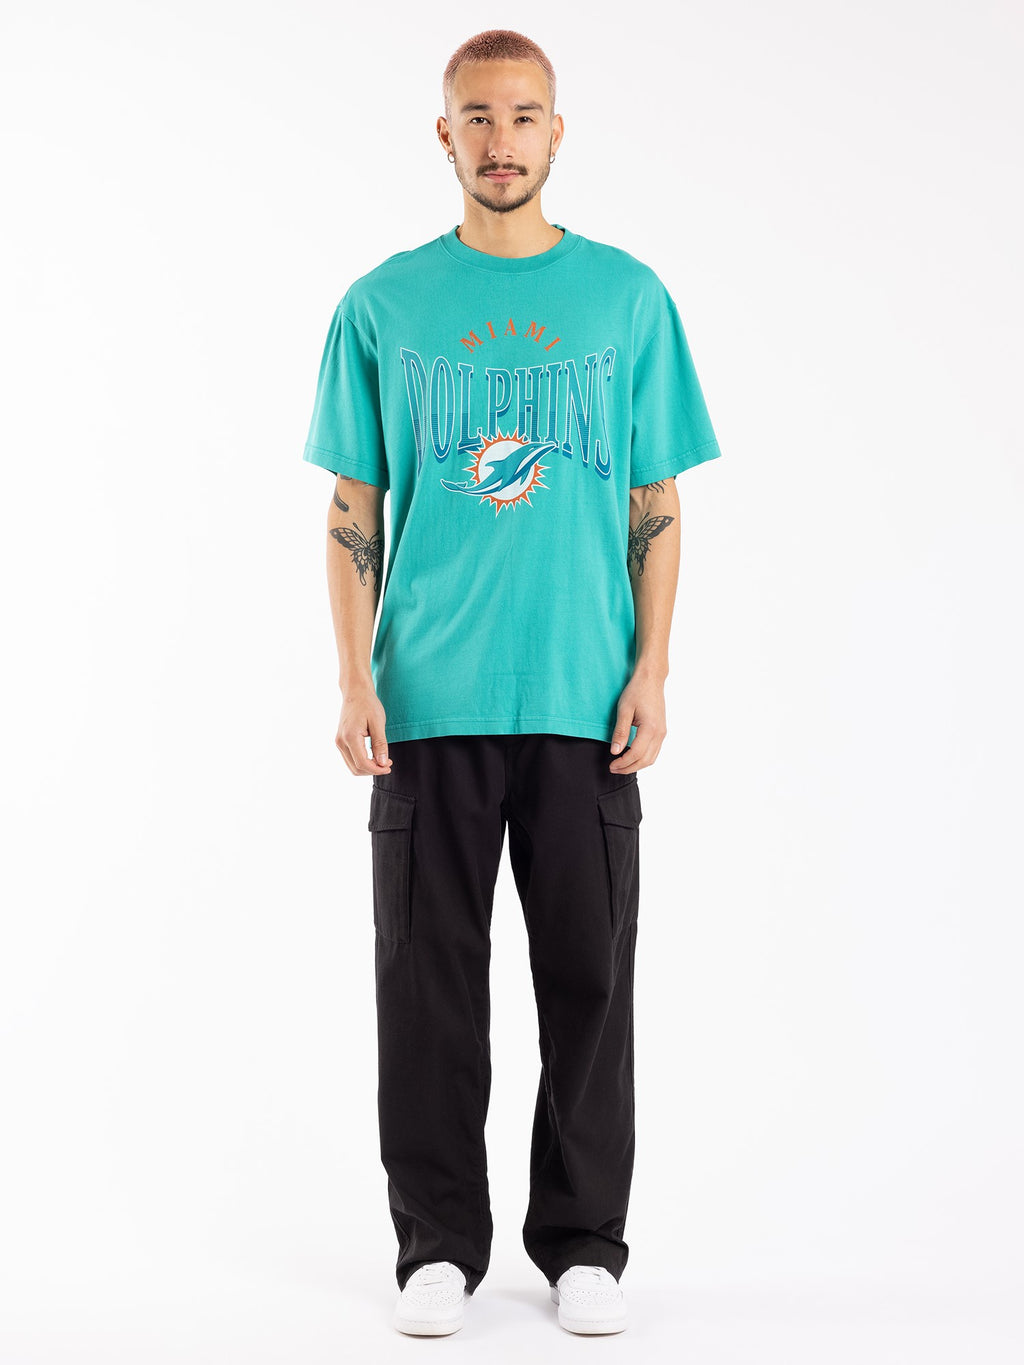 MJA-Y8 (Majestic vintage arch state tee dolphin faded teal) 22393043 MAJESTIC